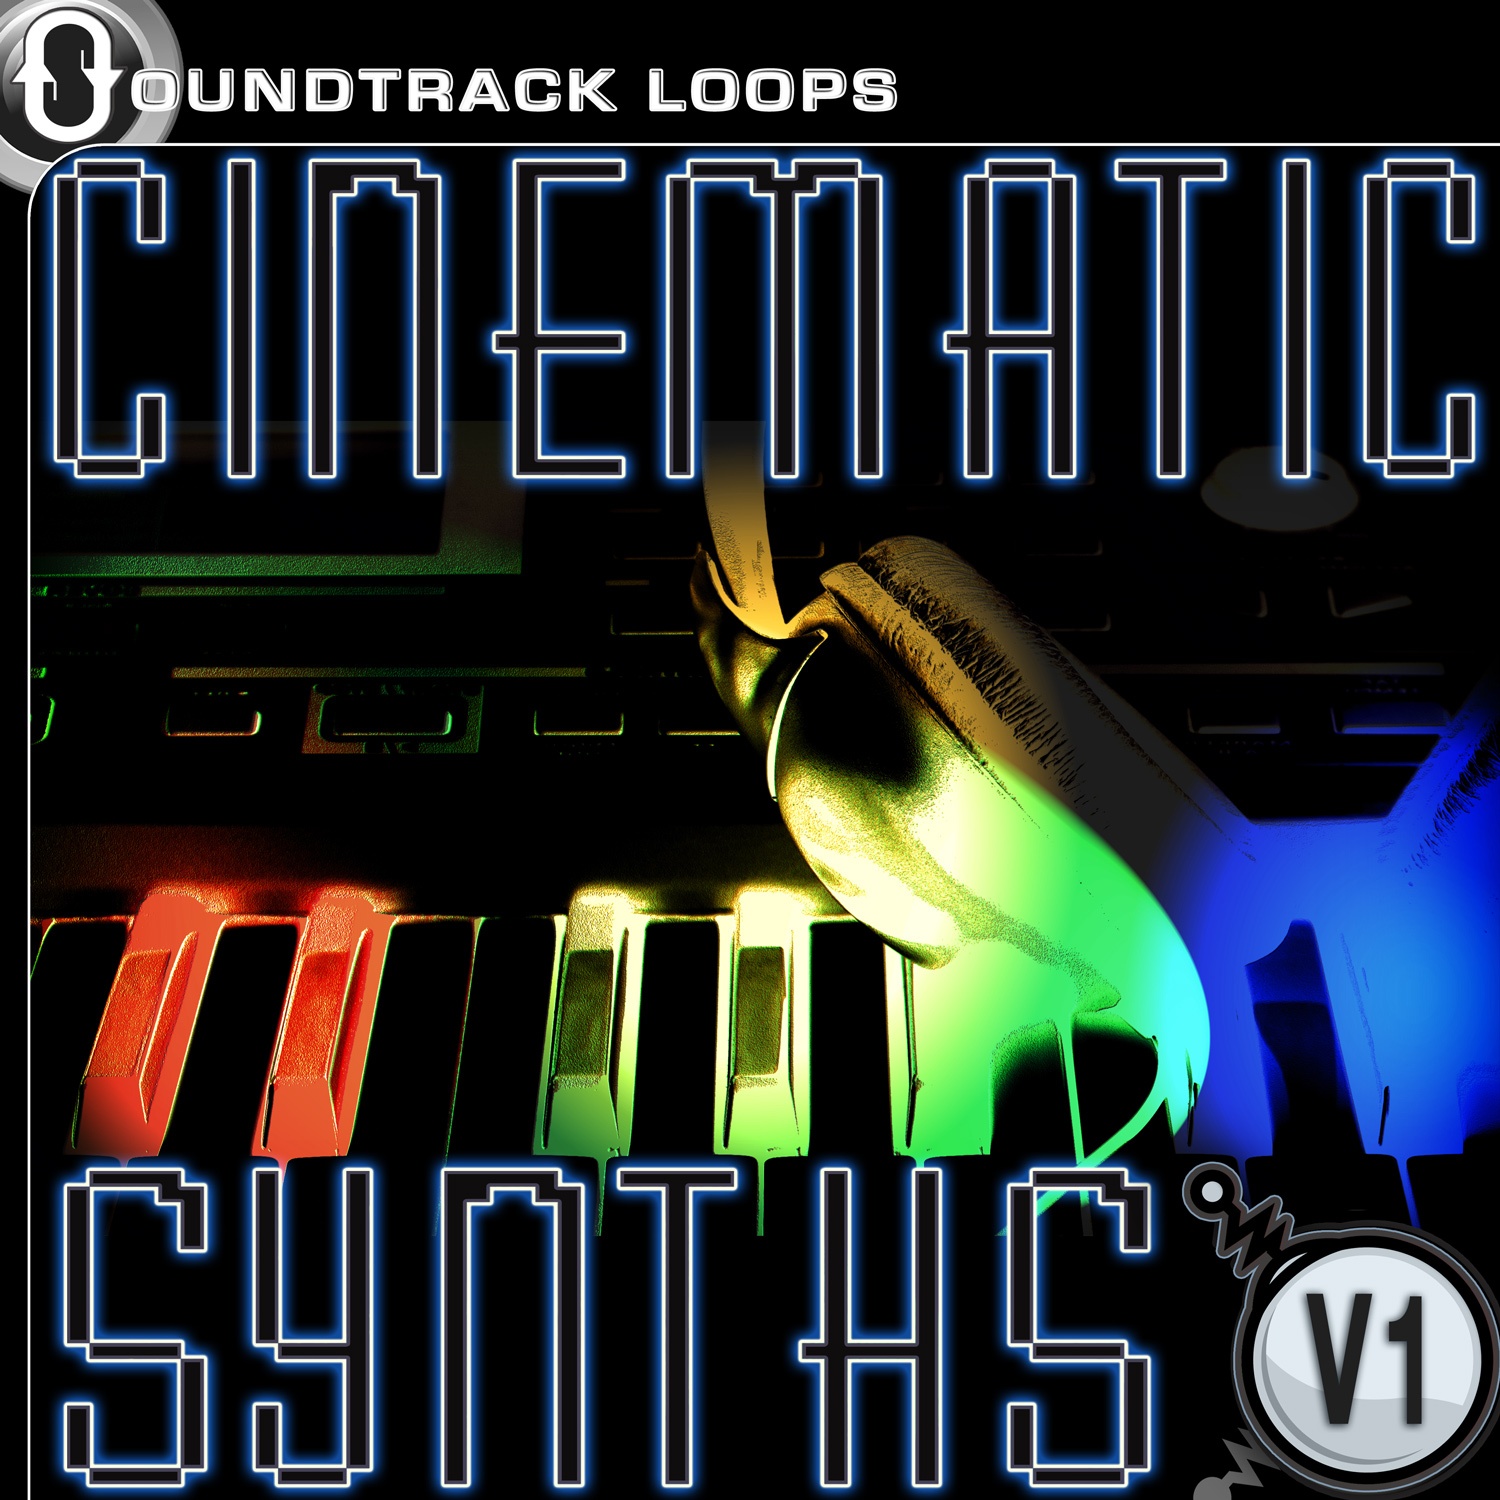 Soundtrack Loops: Cinematic Synths [REX]-0